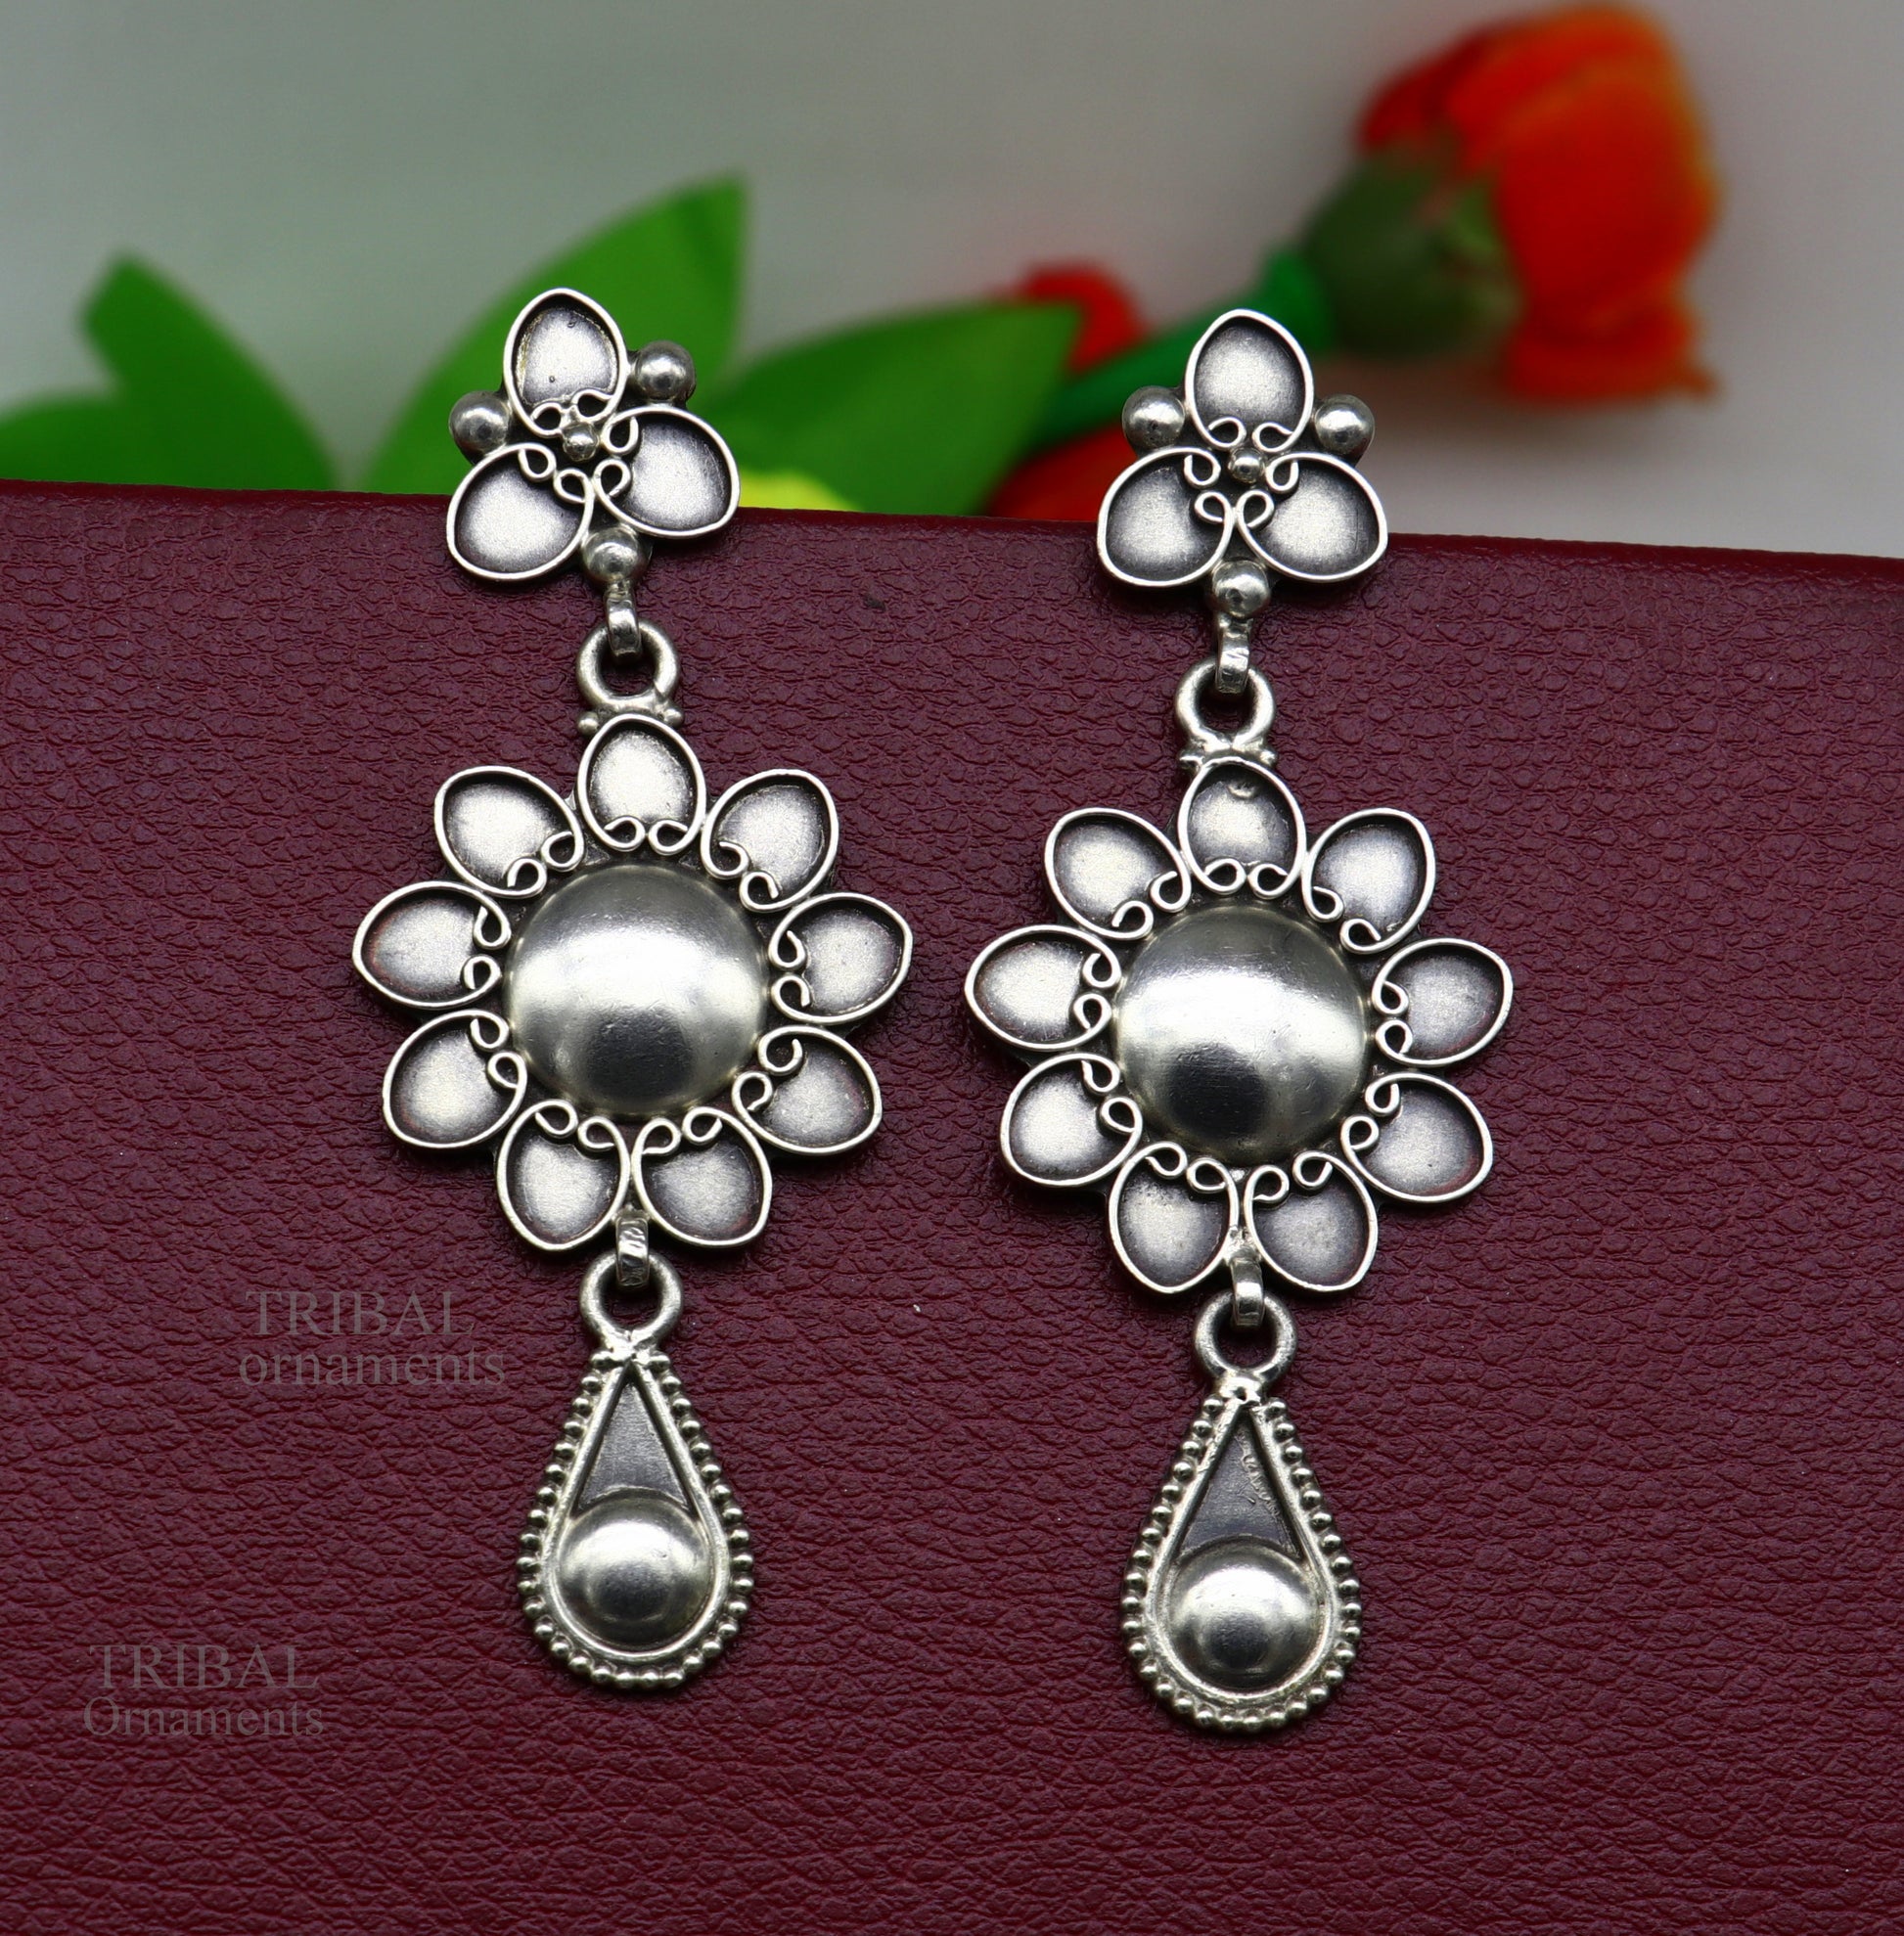 925 sterling silver handmade unique fancy design floral stud earring attractive gifting jewelry, tribal earring drop dangle ear1109 - TRIBAL ORNAMENTS